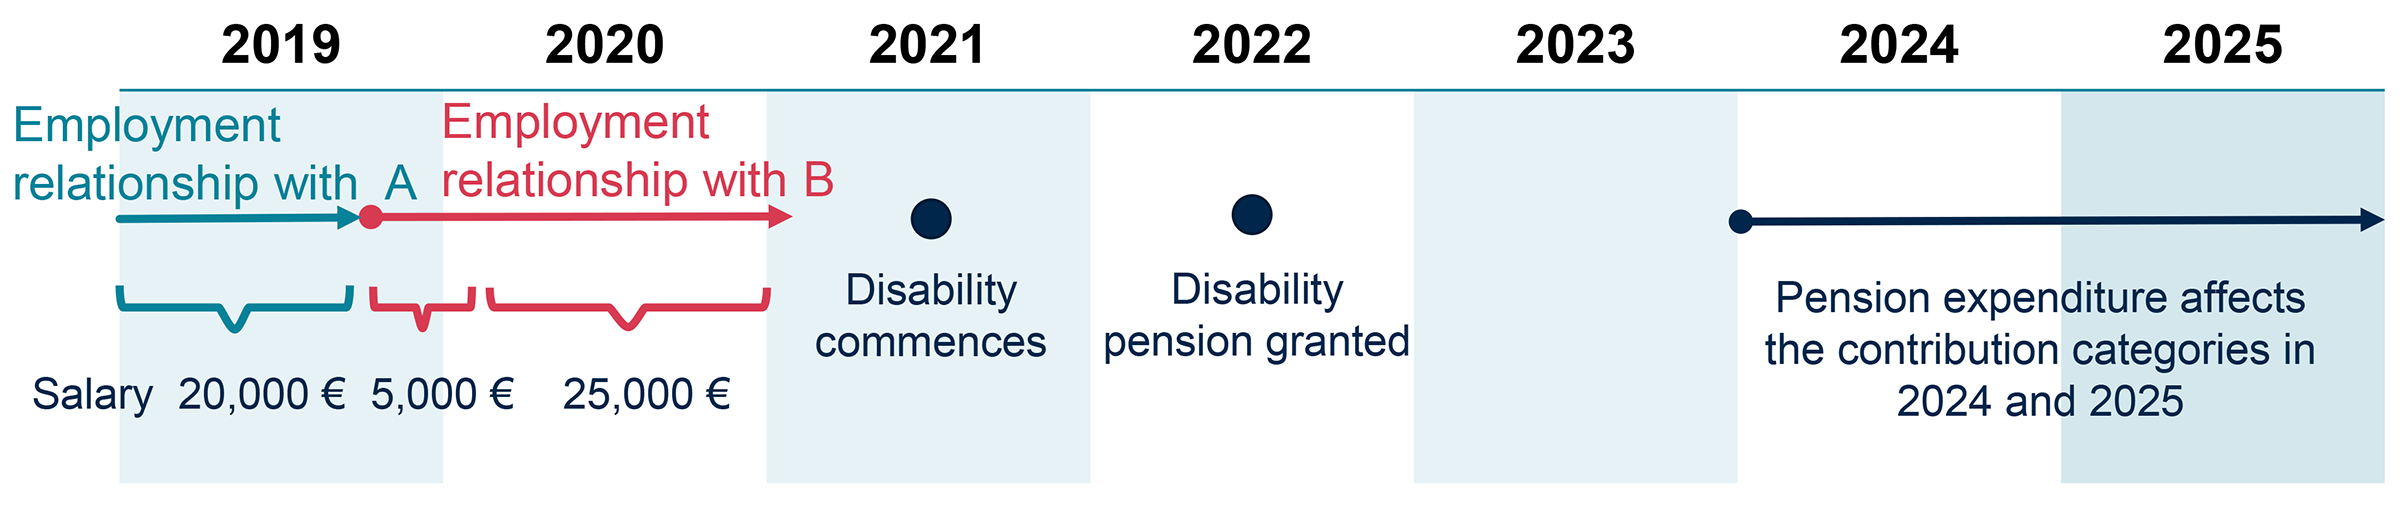 Pension_expenditure_example_2024.png